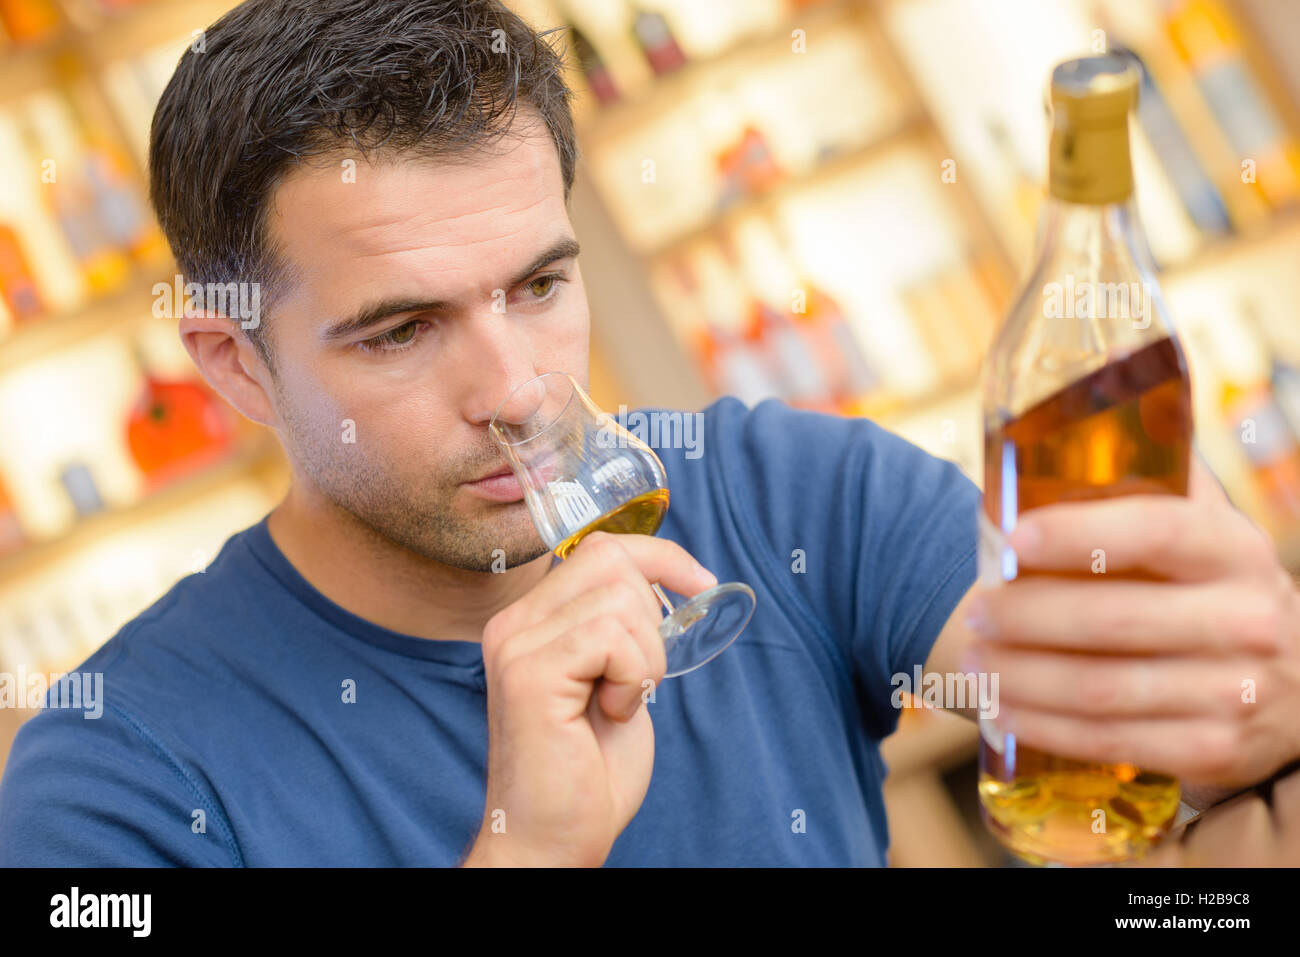 man reading the alcohol label Stock Photo